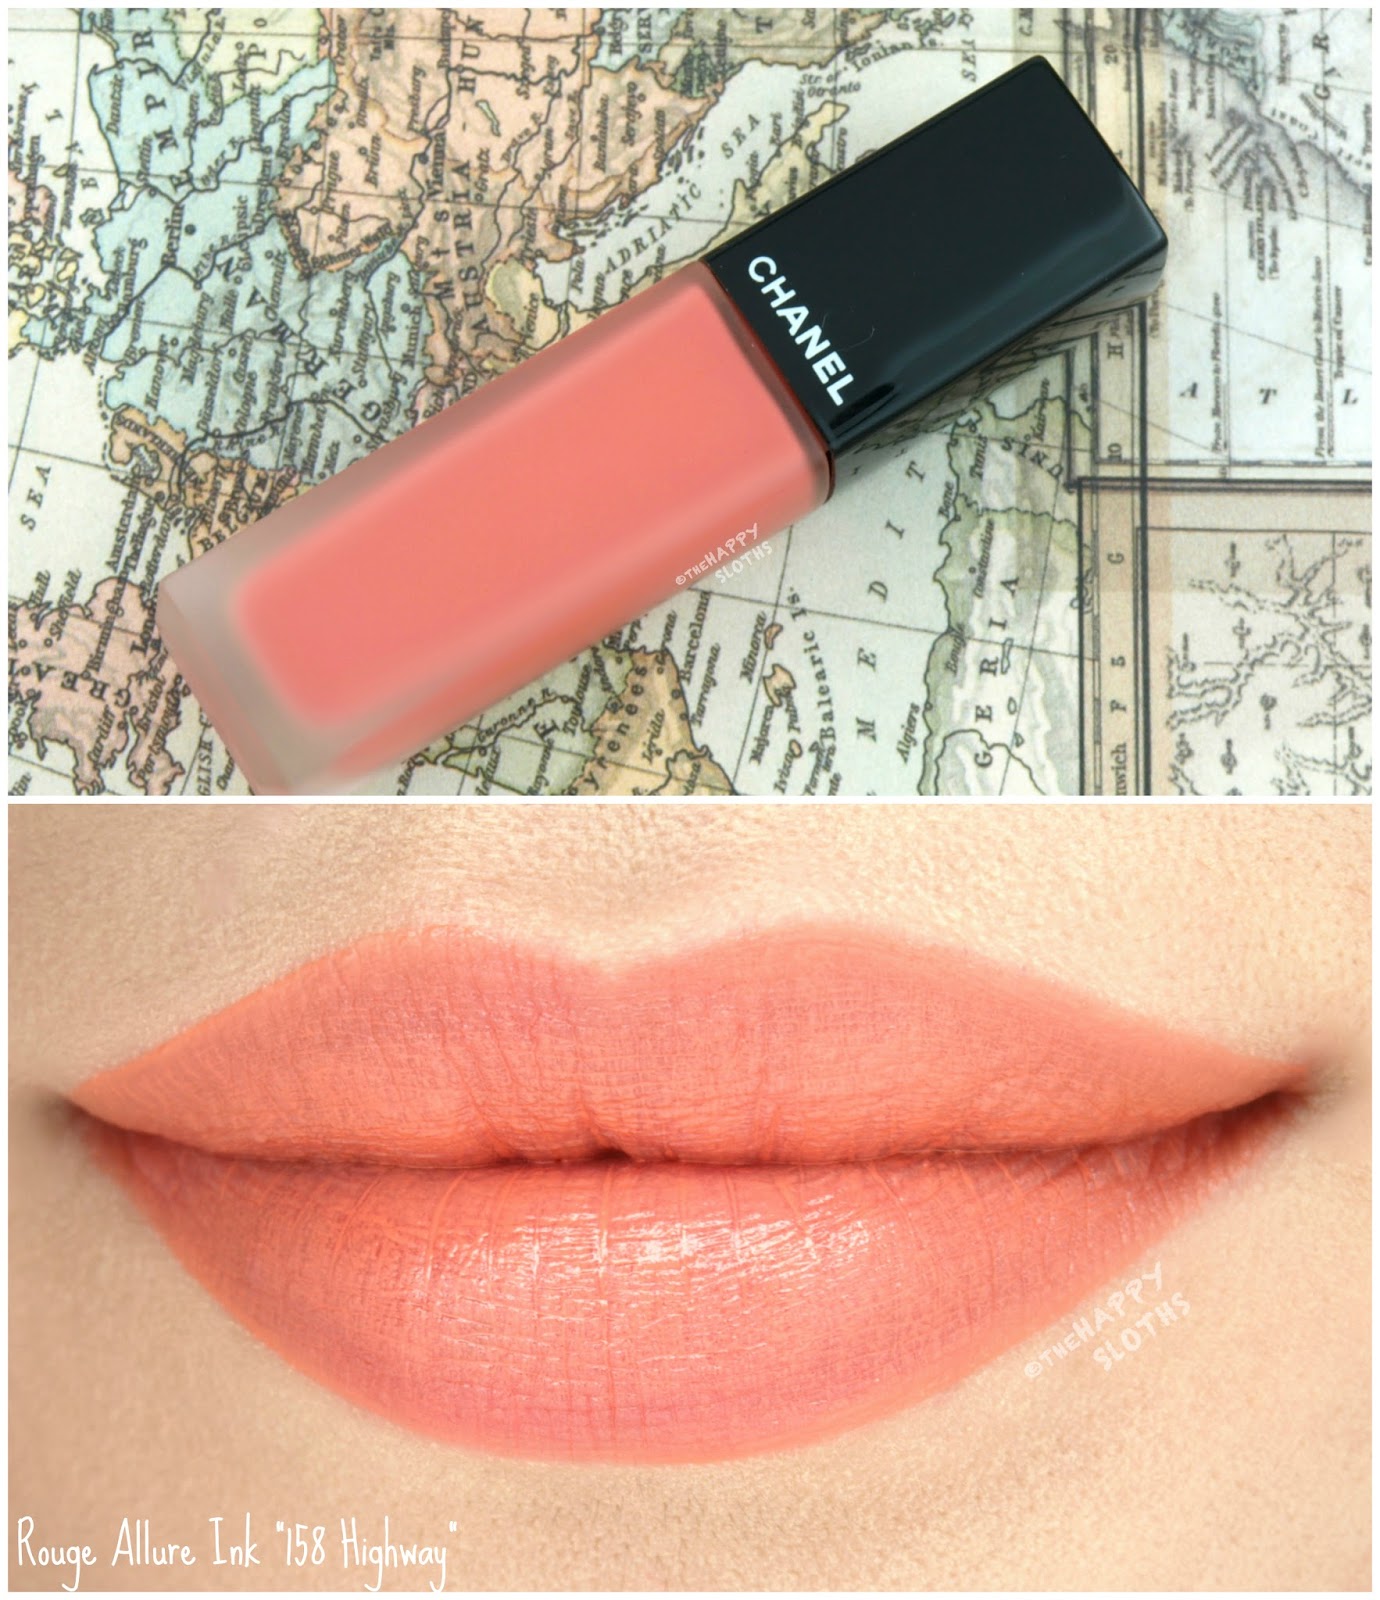 NEW CHANEL 'LE ROUGE DUO ULTRA TENUE' LONG WEAR LIPSTICK SHADES! 